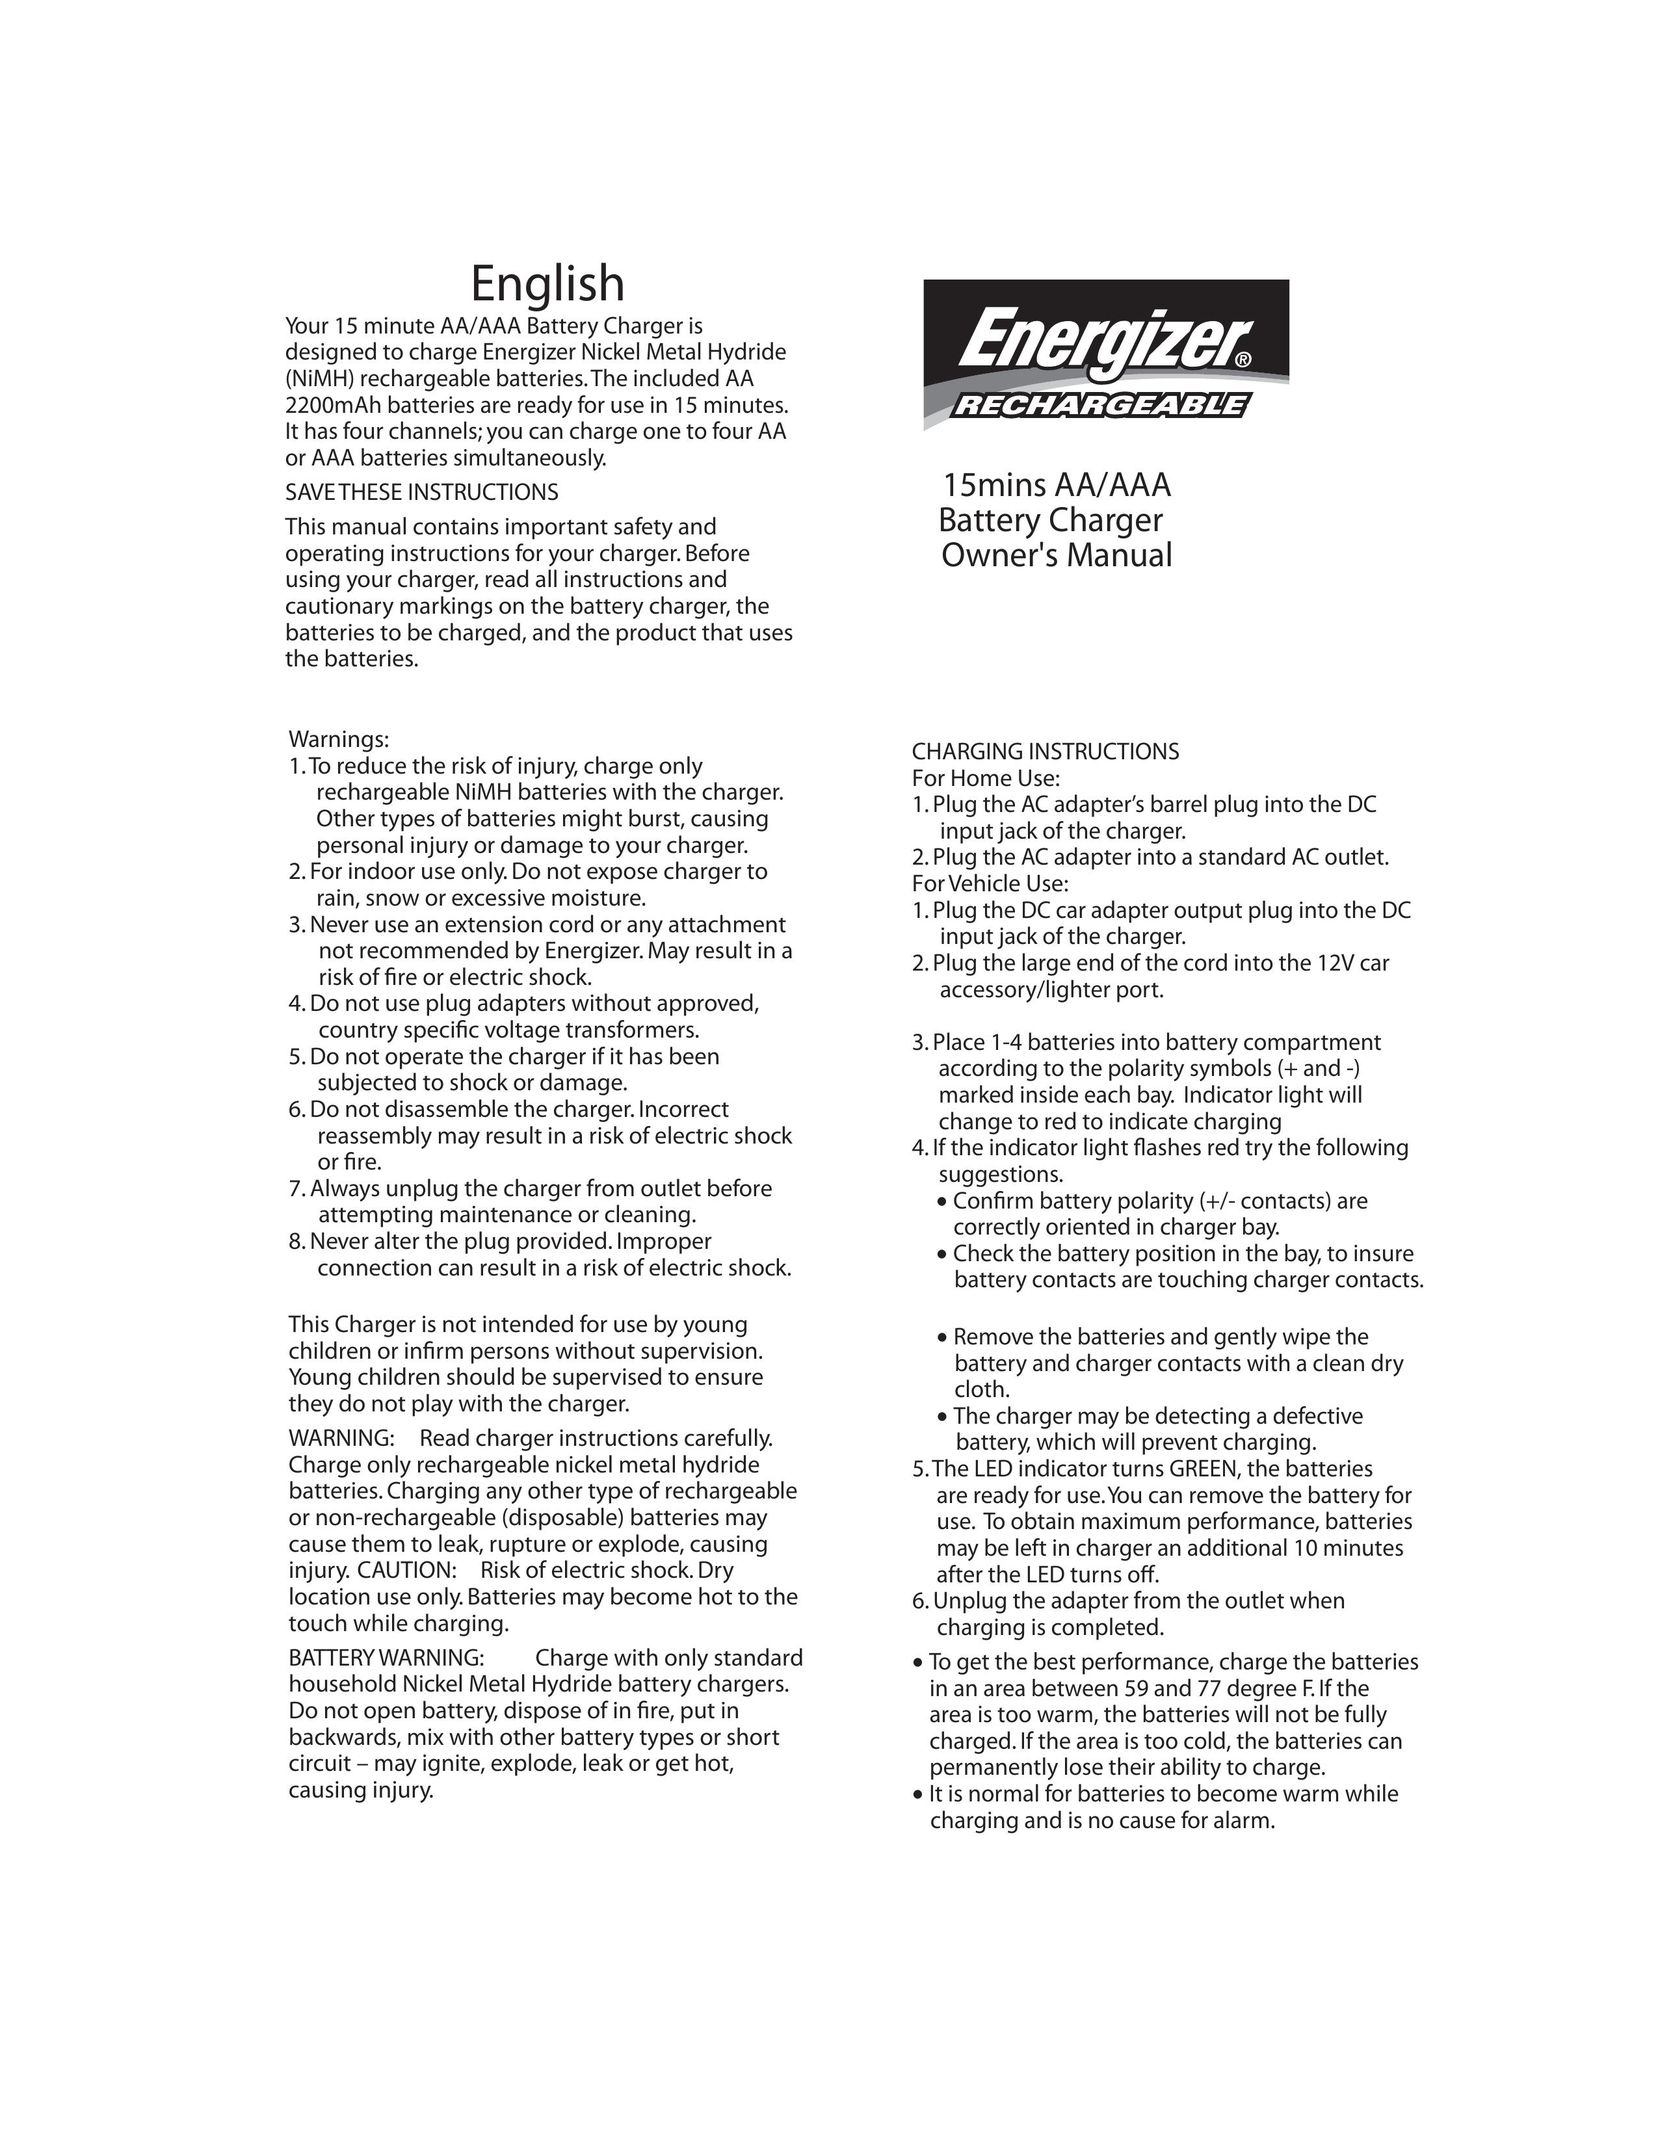 Energizer CH15MNCP4 Battery Charger User Manual